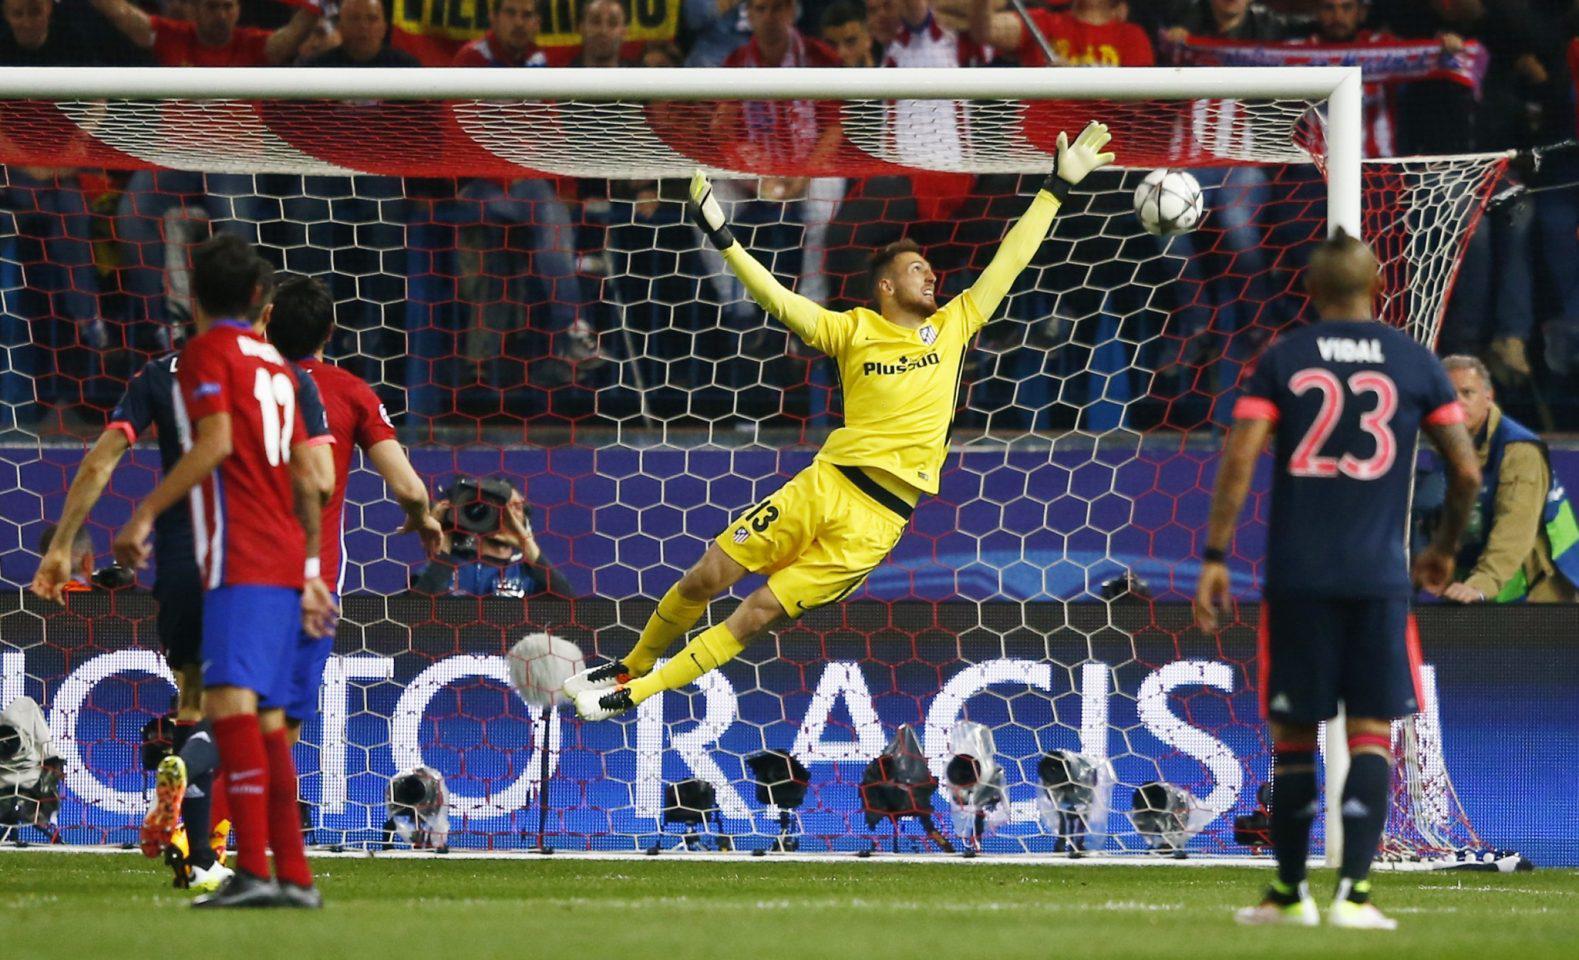 Football Soccer - Atletico Madrid v Bayern Munich - UEFA Champions League Semi Final First Leg - Vicente Calderon Stadium - 27/4/16 Bayern Munich's David Alaba (not pictured) hits the bar as Atletico Madrid's Jan Oblak attempts save Reuters / Michael Dalder Livepic EDITORIAL USE ONLY.